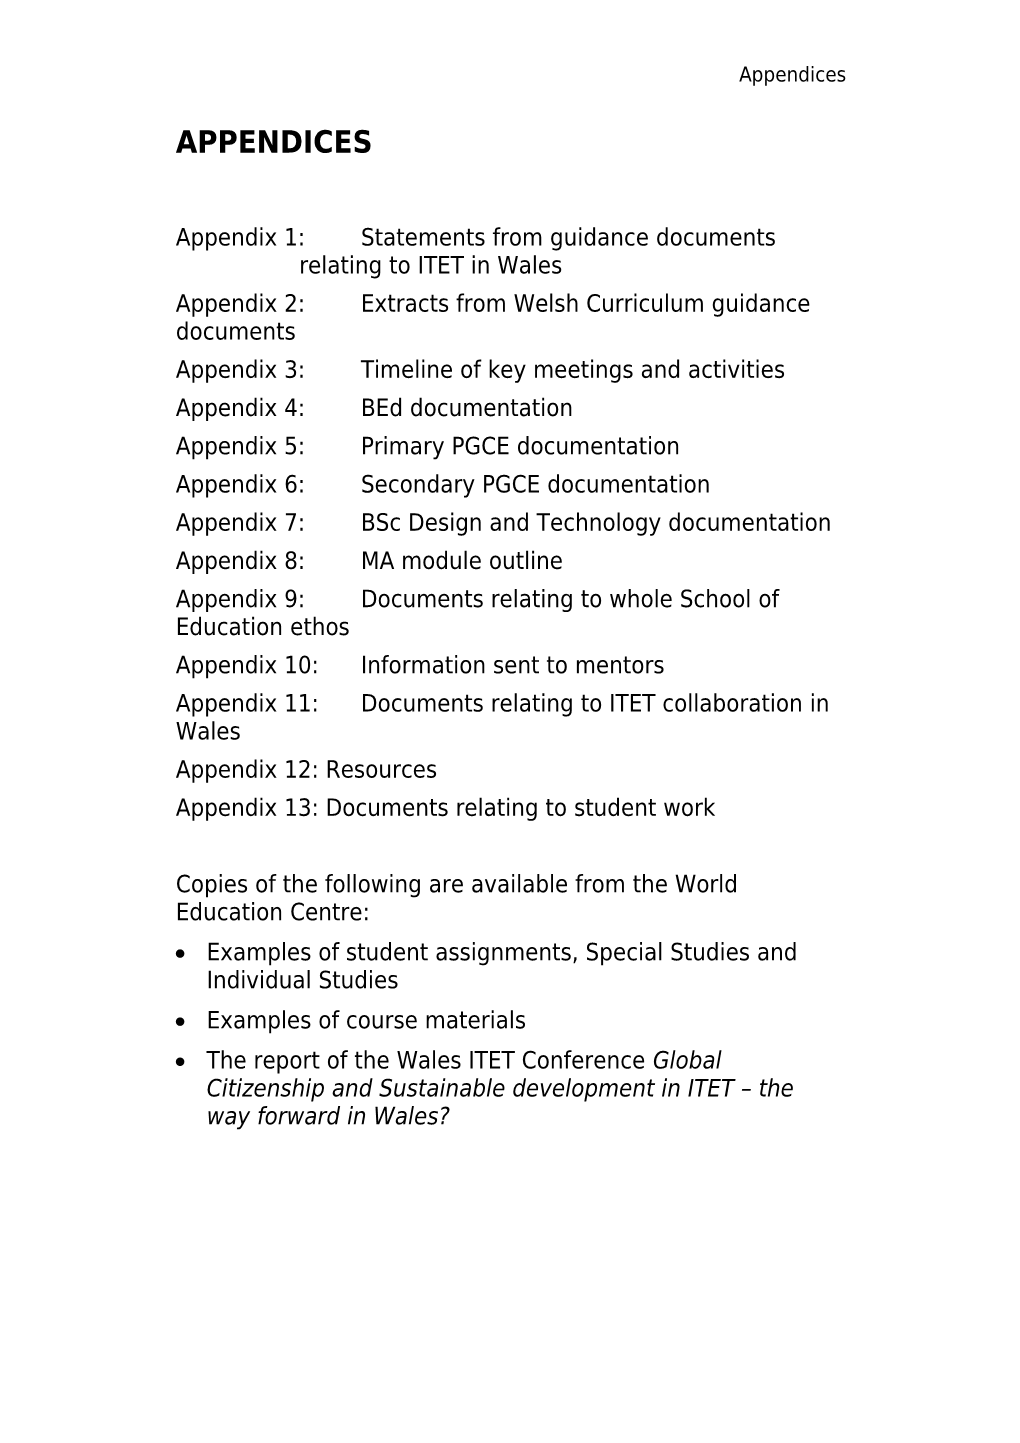 Appendix 1: Statements from Guidance Documents Relating to ITET in Wales